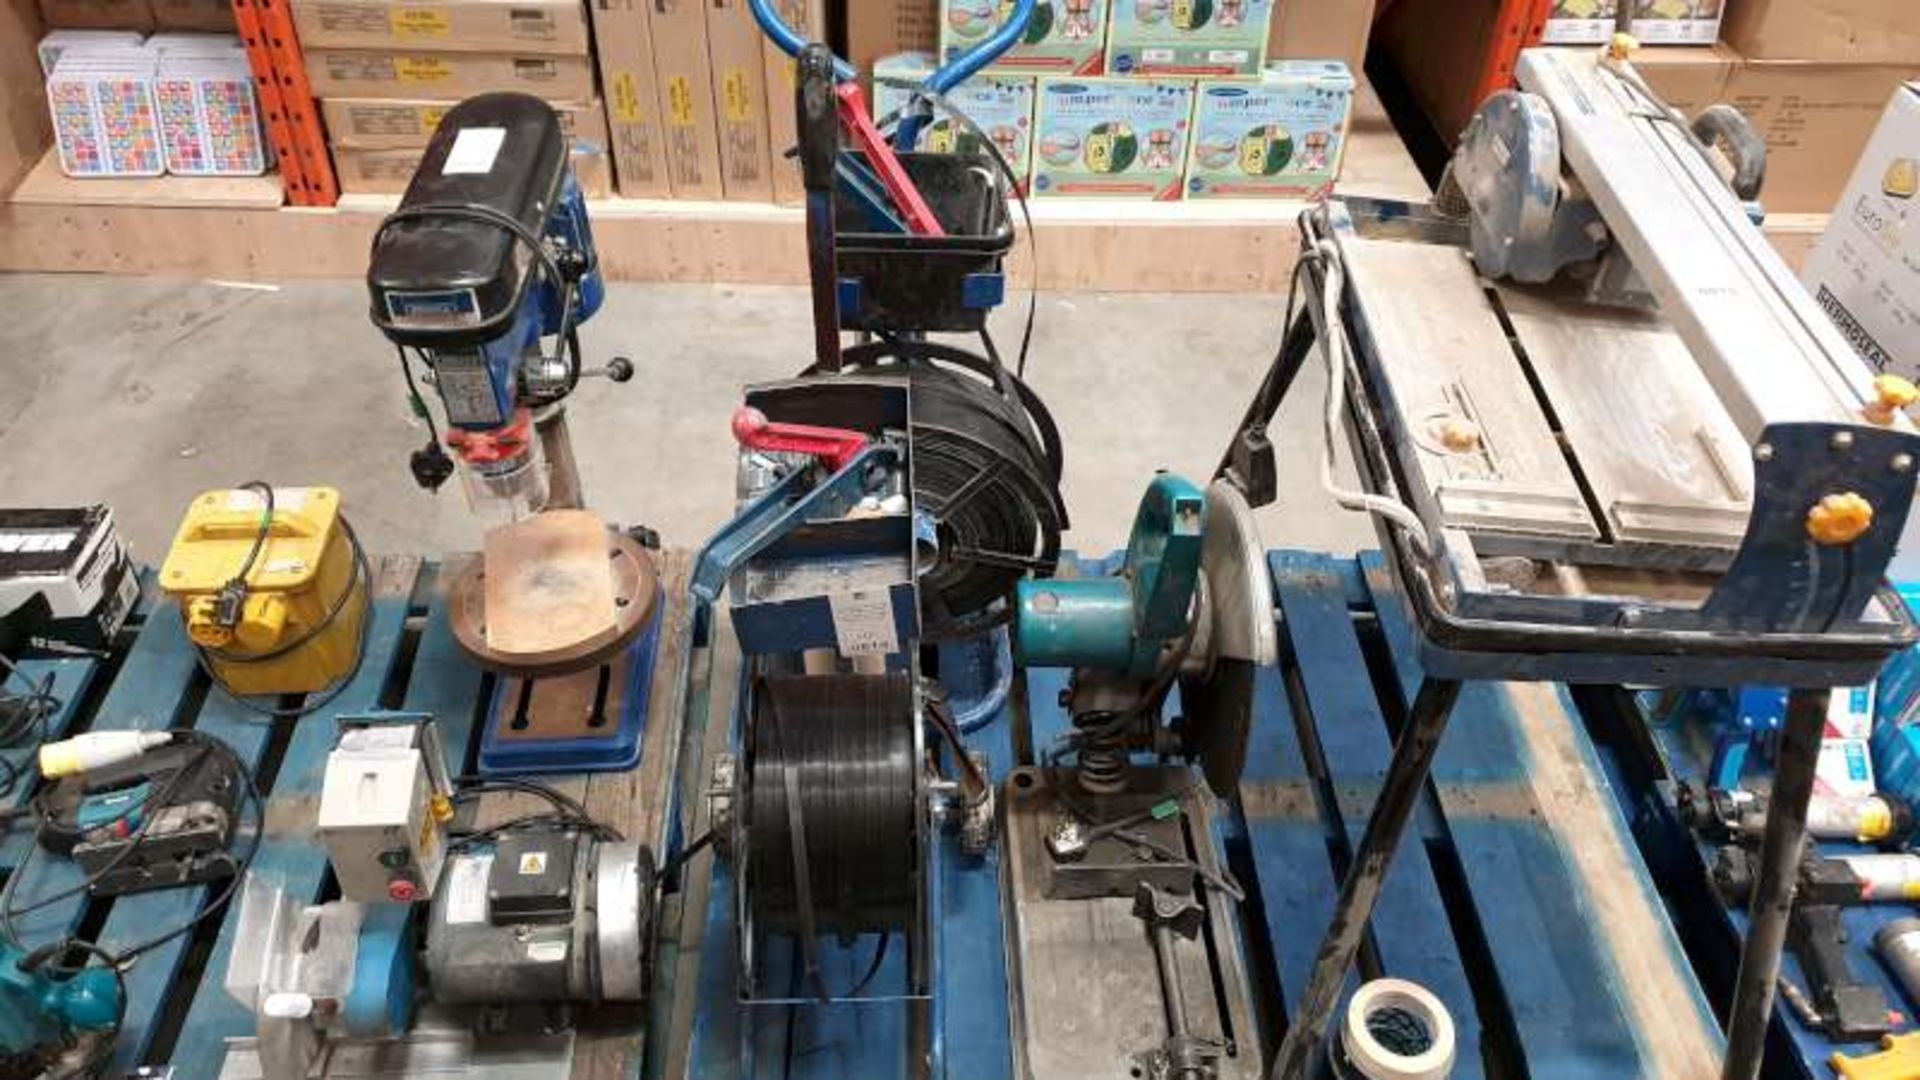 LOT CONTAINING 2 X PALLET BANDERS AND A MAKITA CHOPSAW